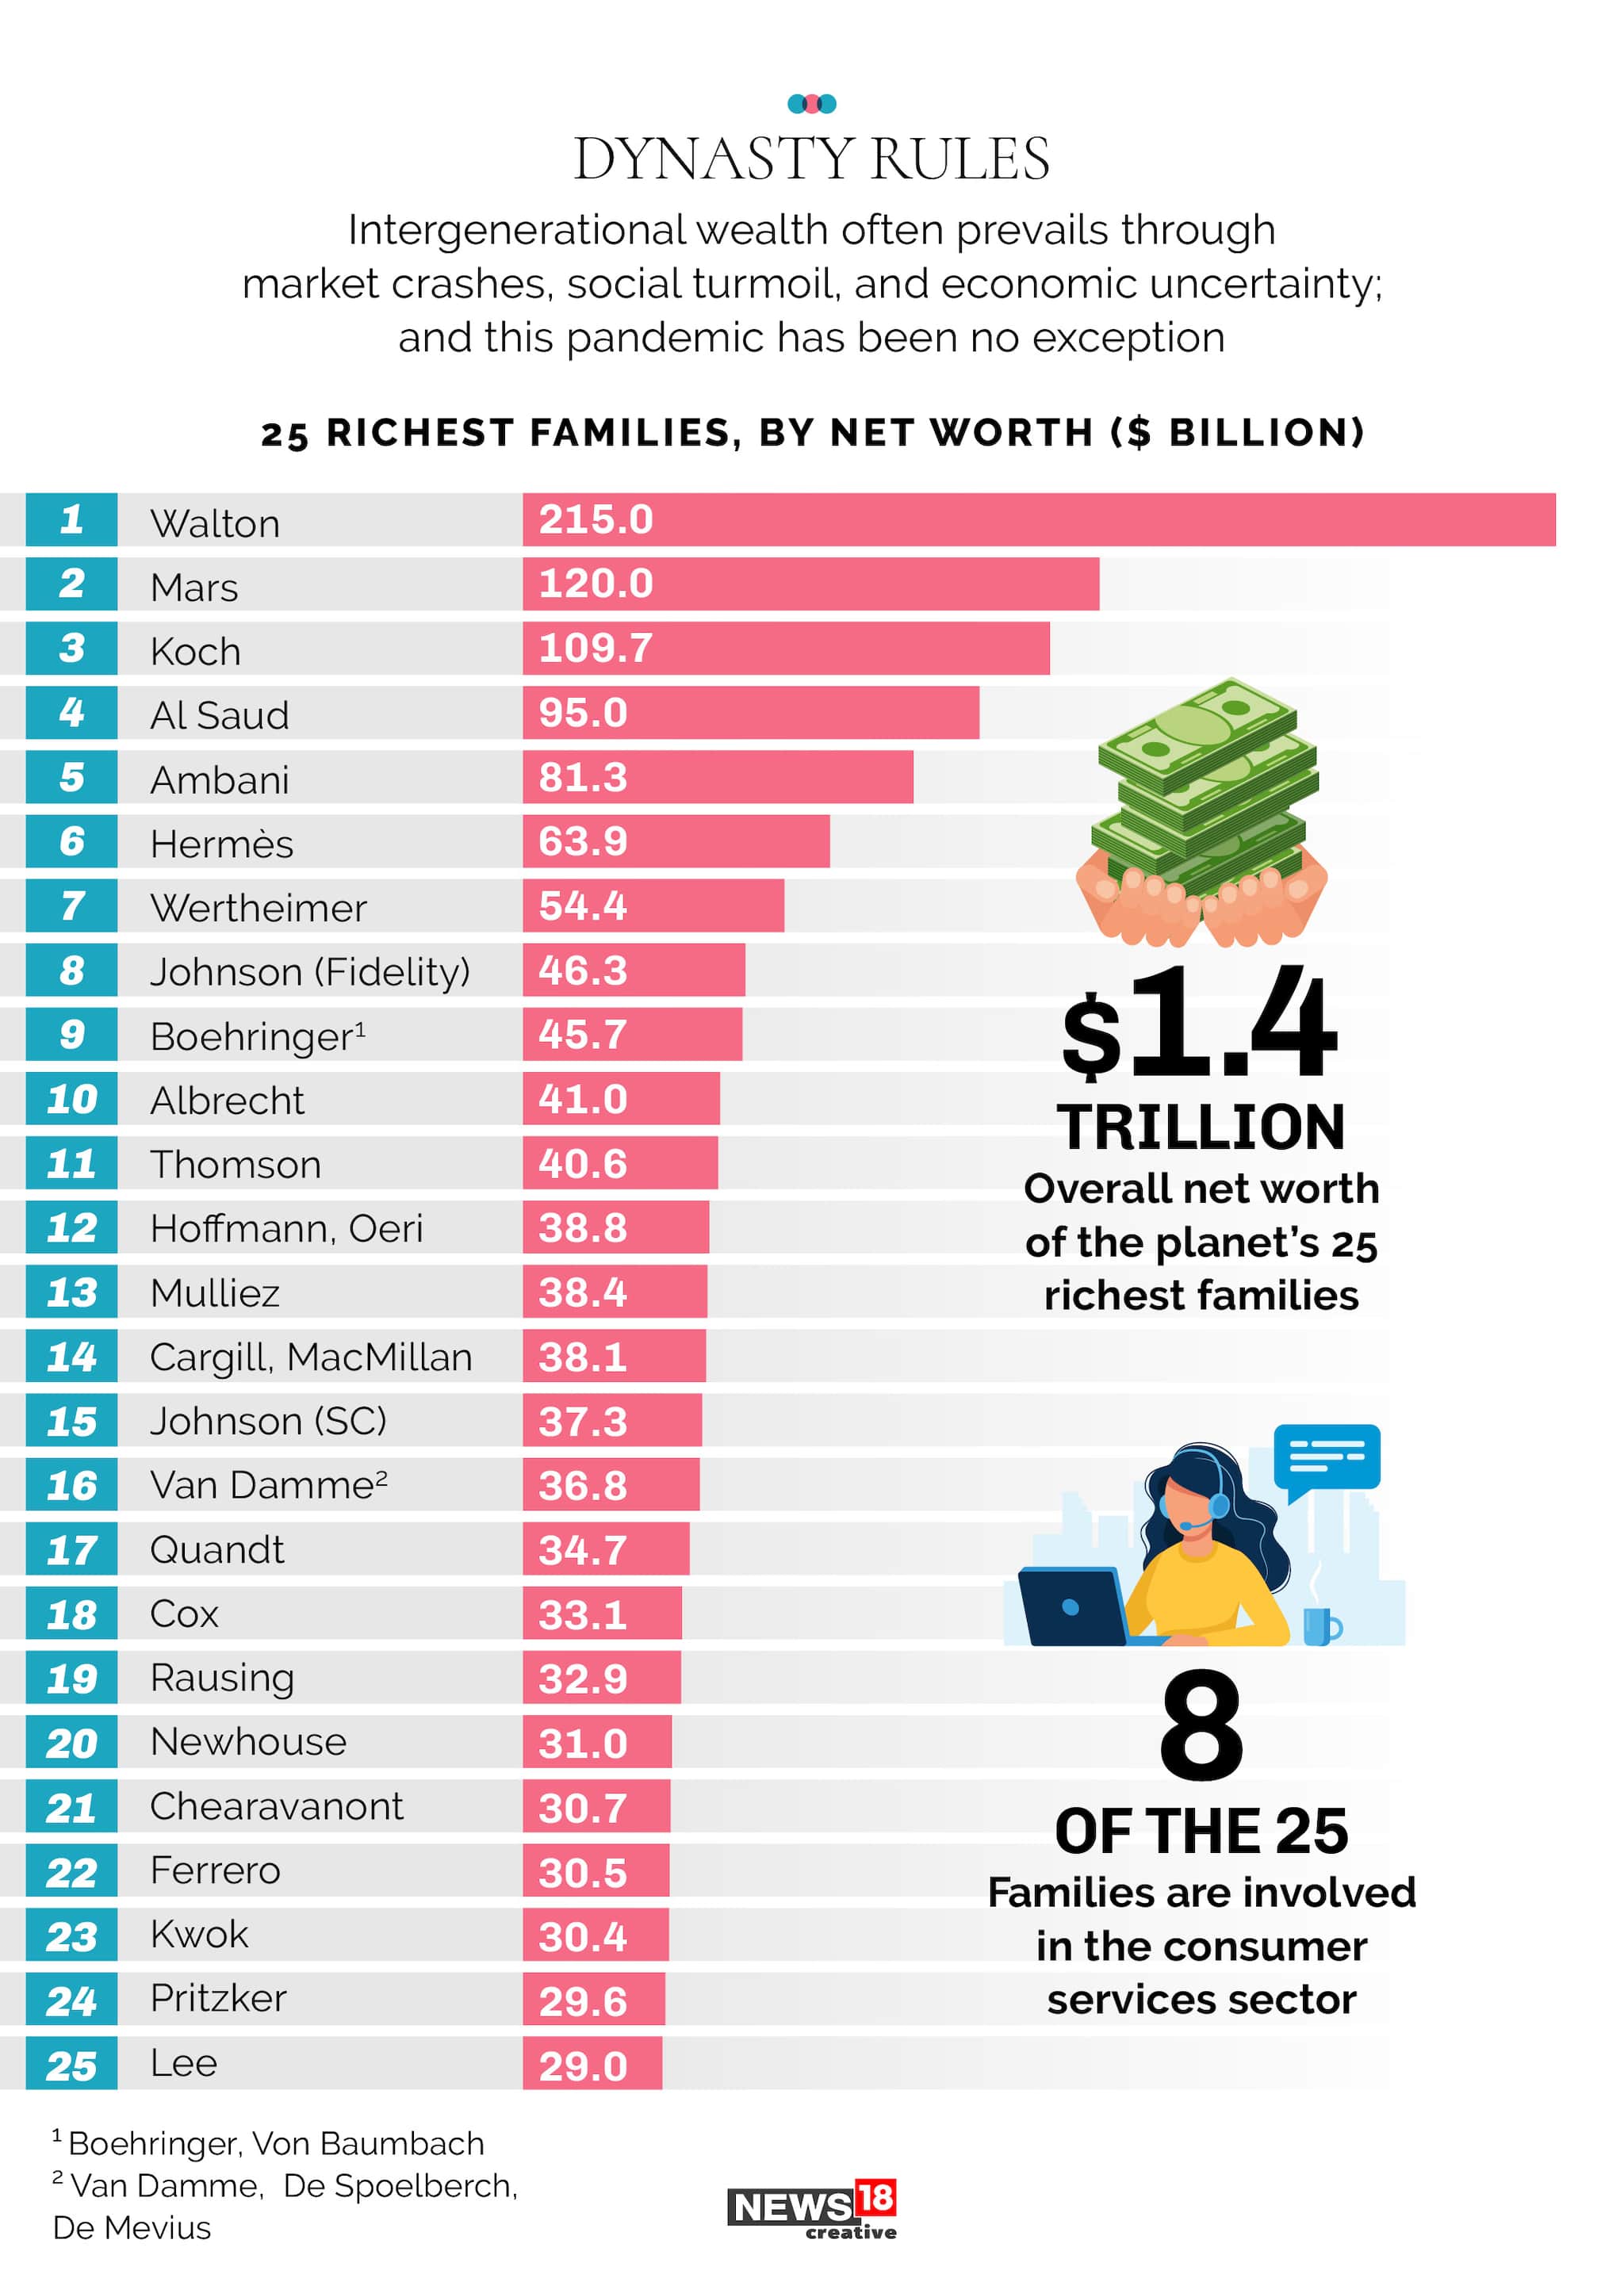 The world's richest dynasty is at stake – but who will take control?